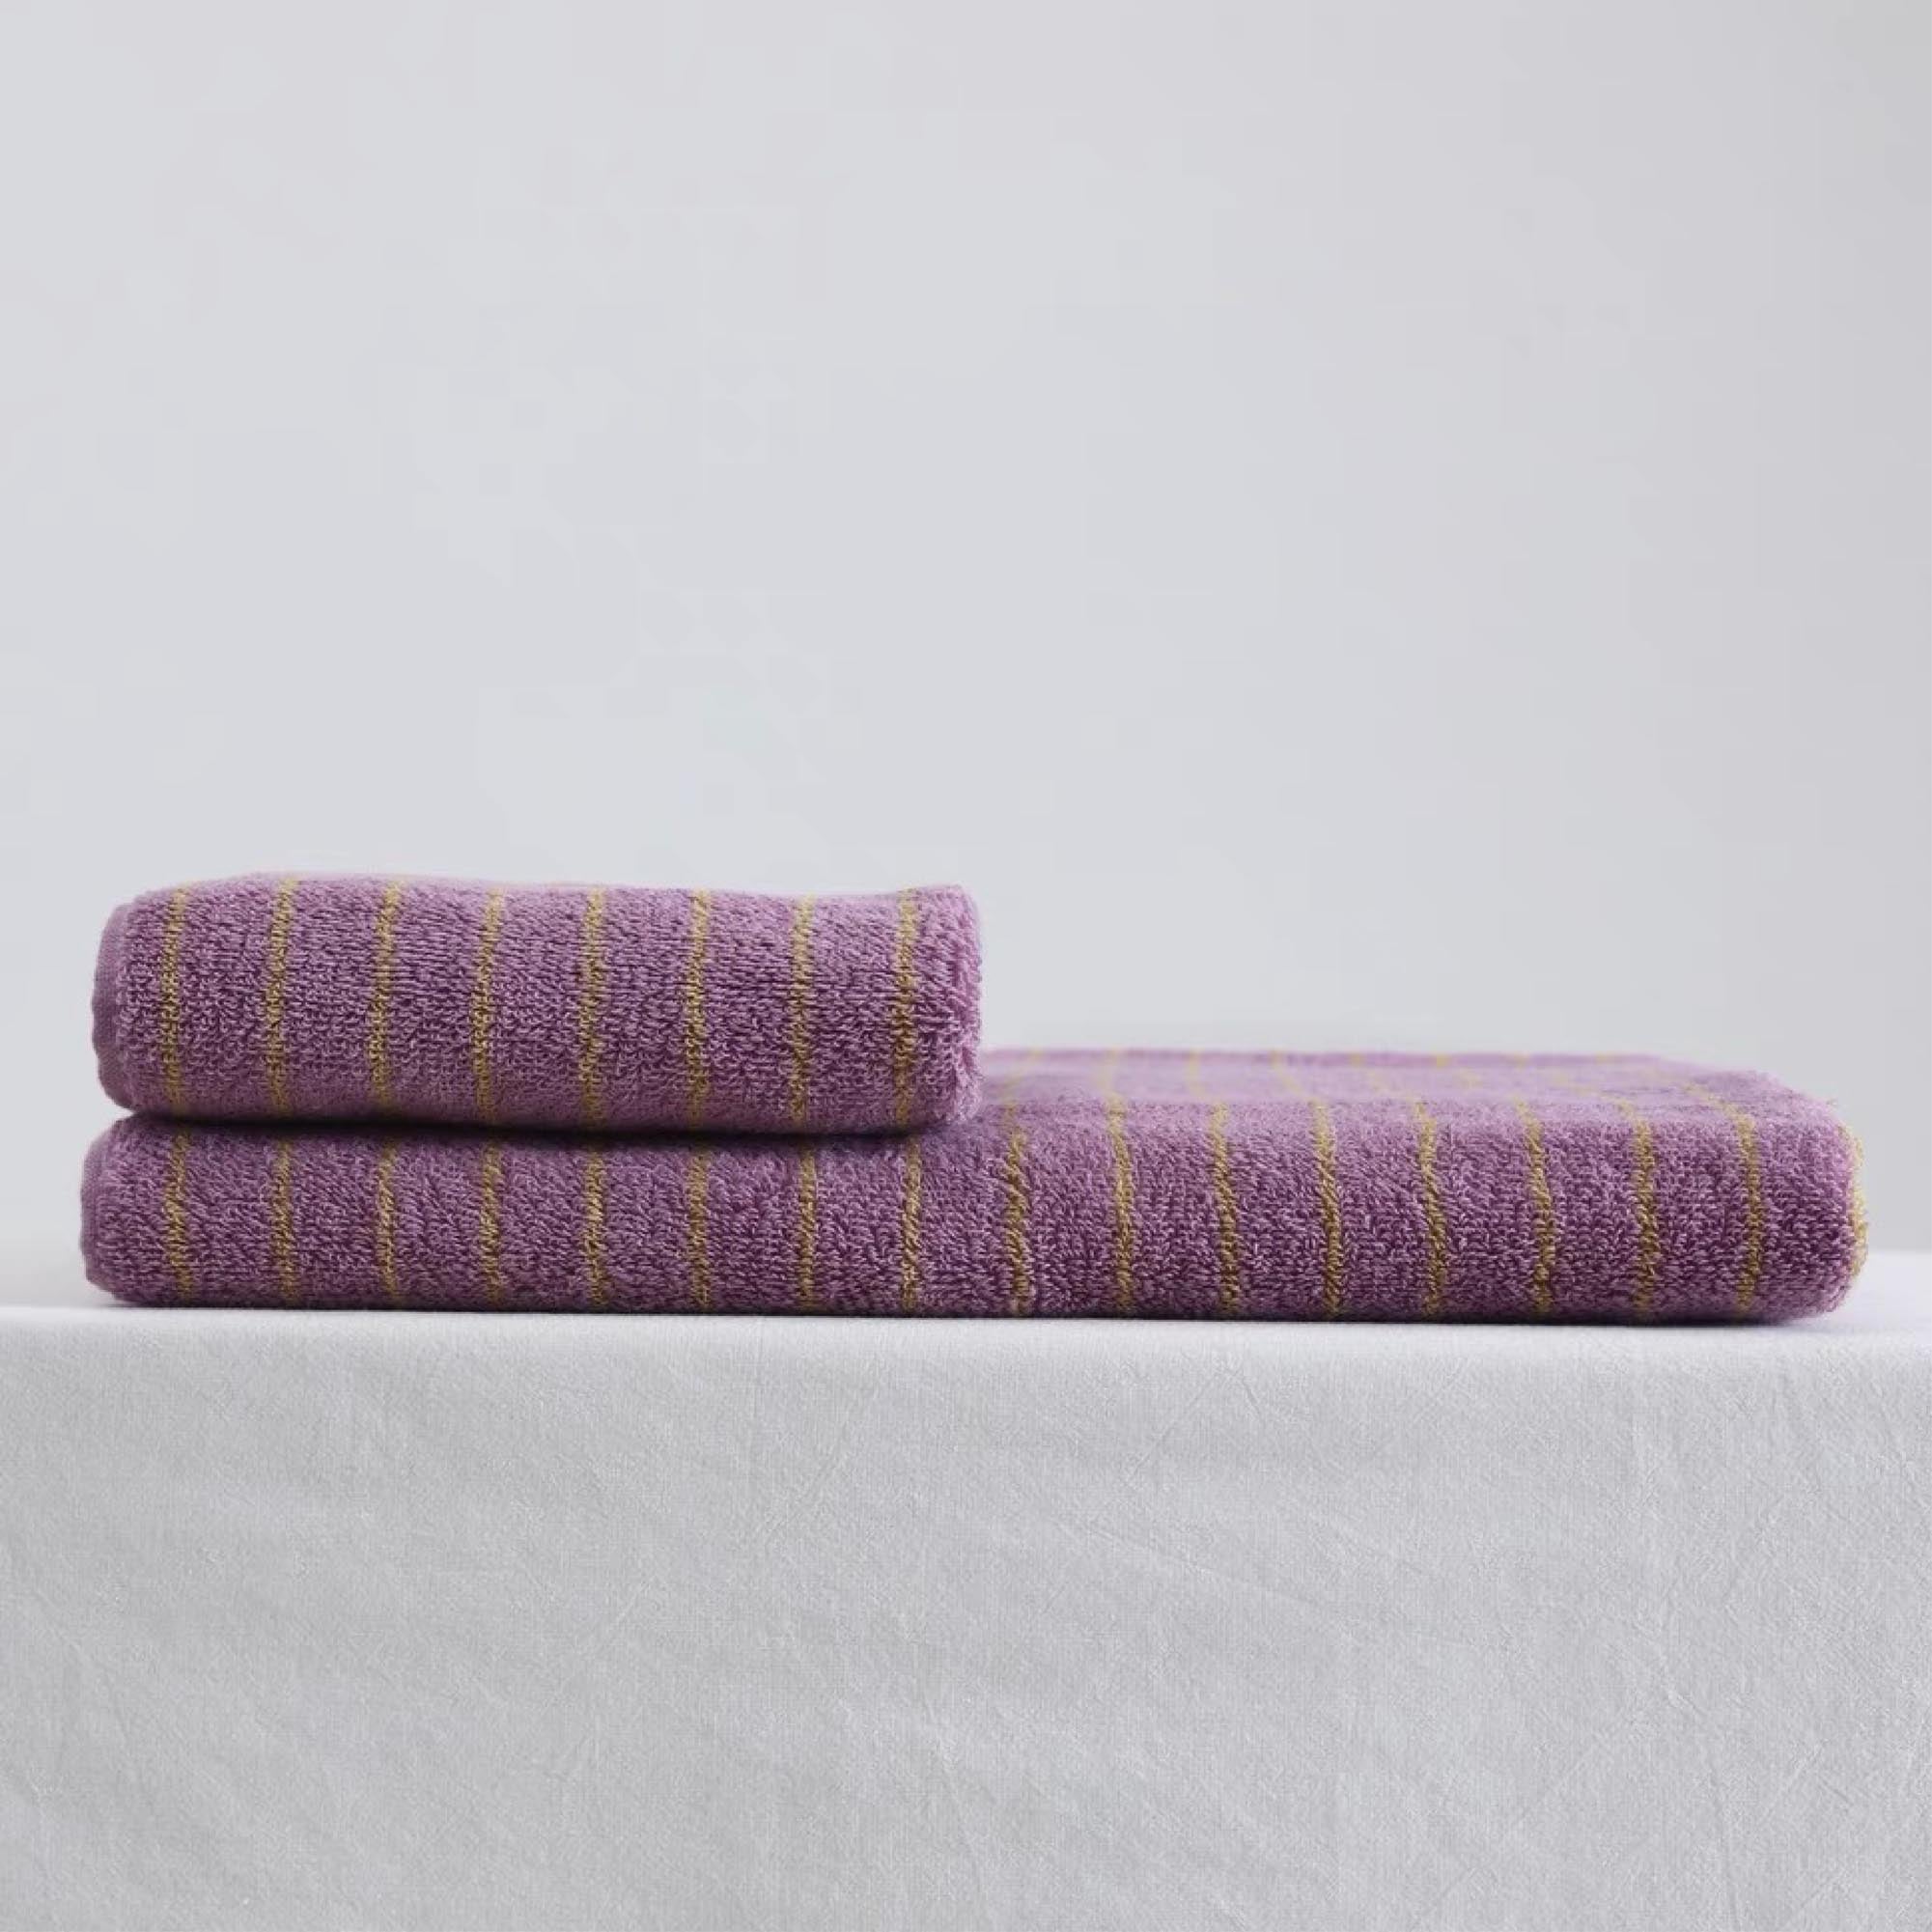 Purple and Yellow Striped Towel